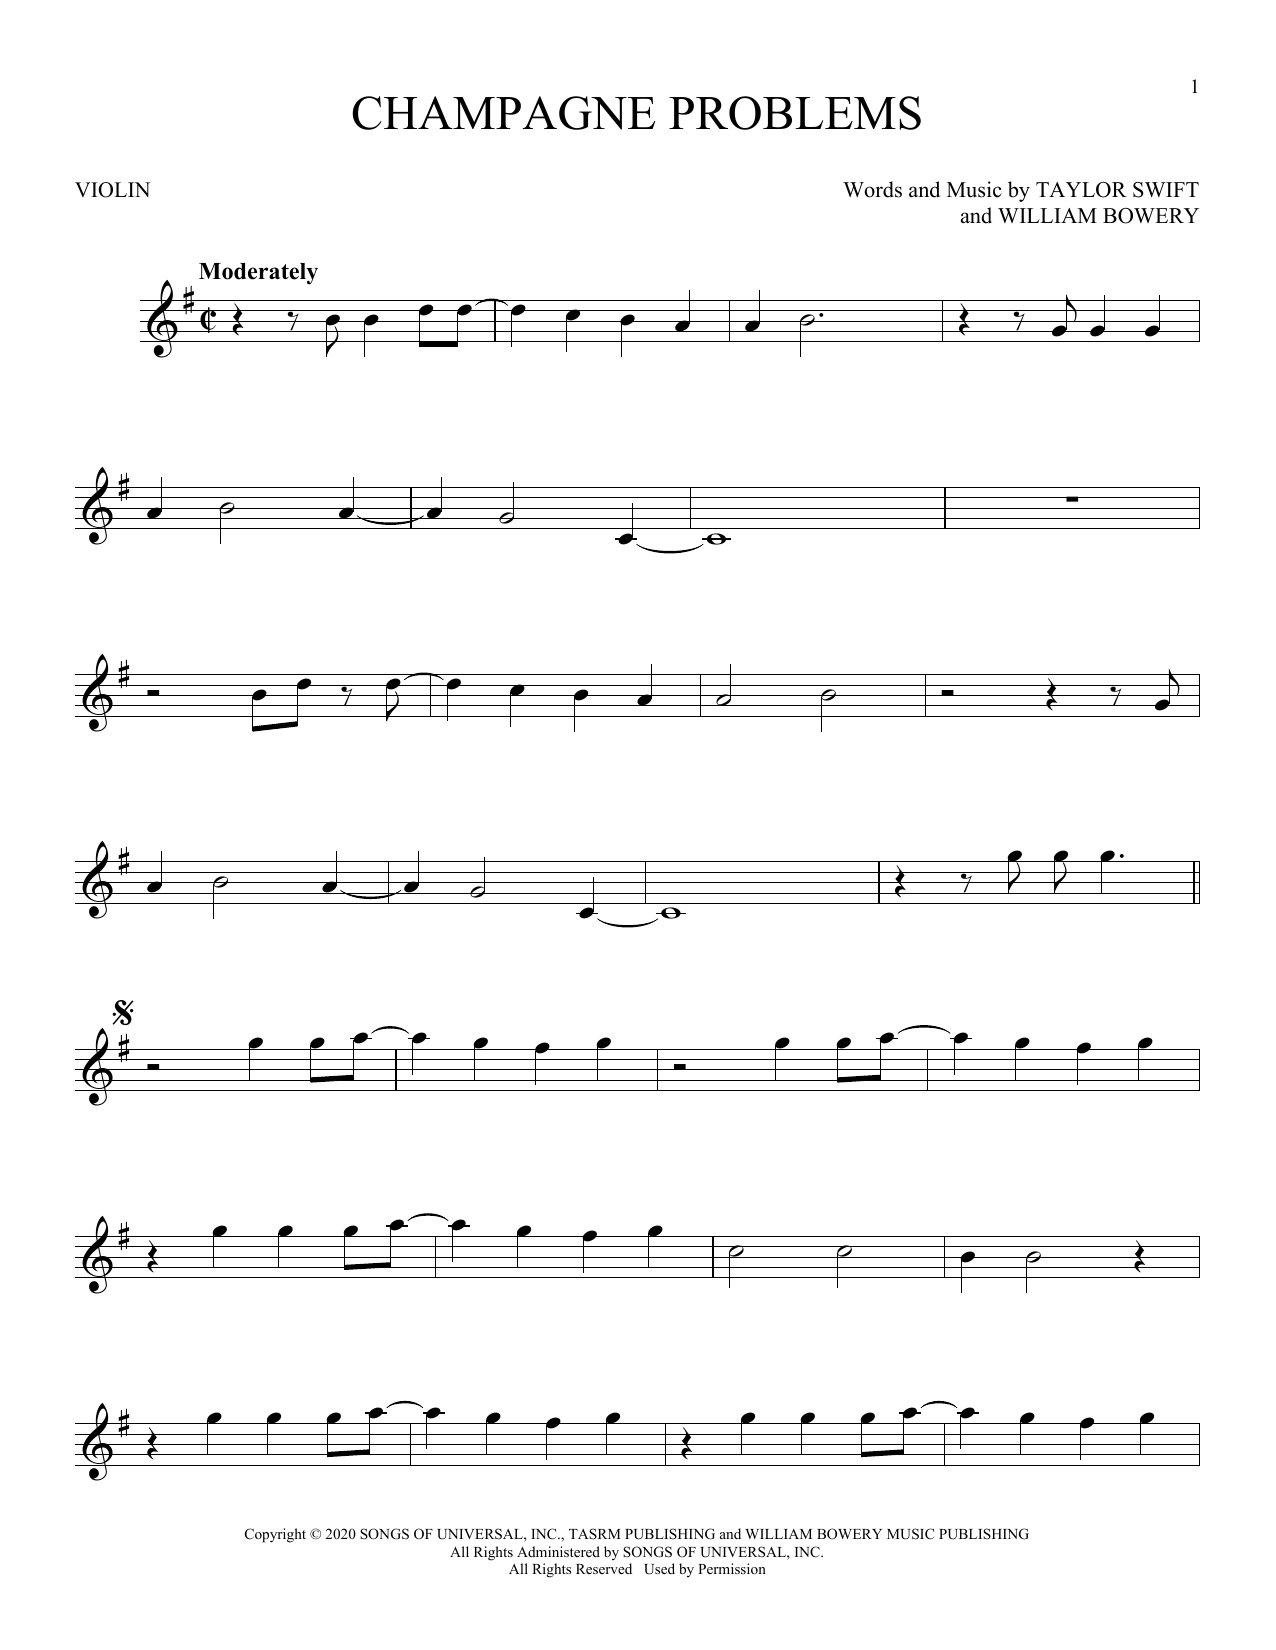 Download Taylor Swift champagne problems Sheet Music